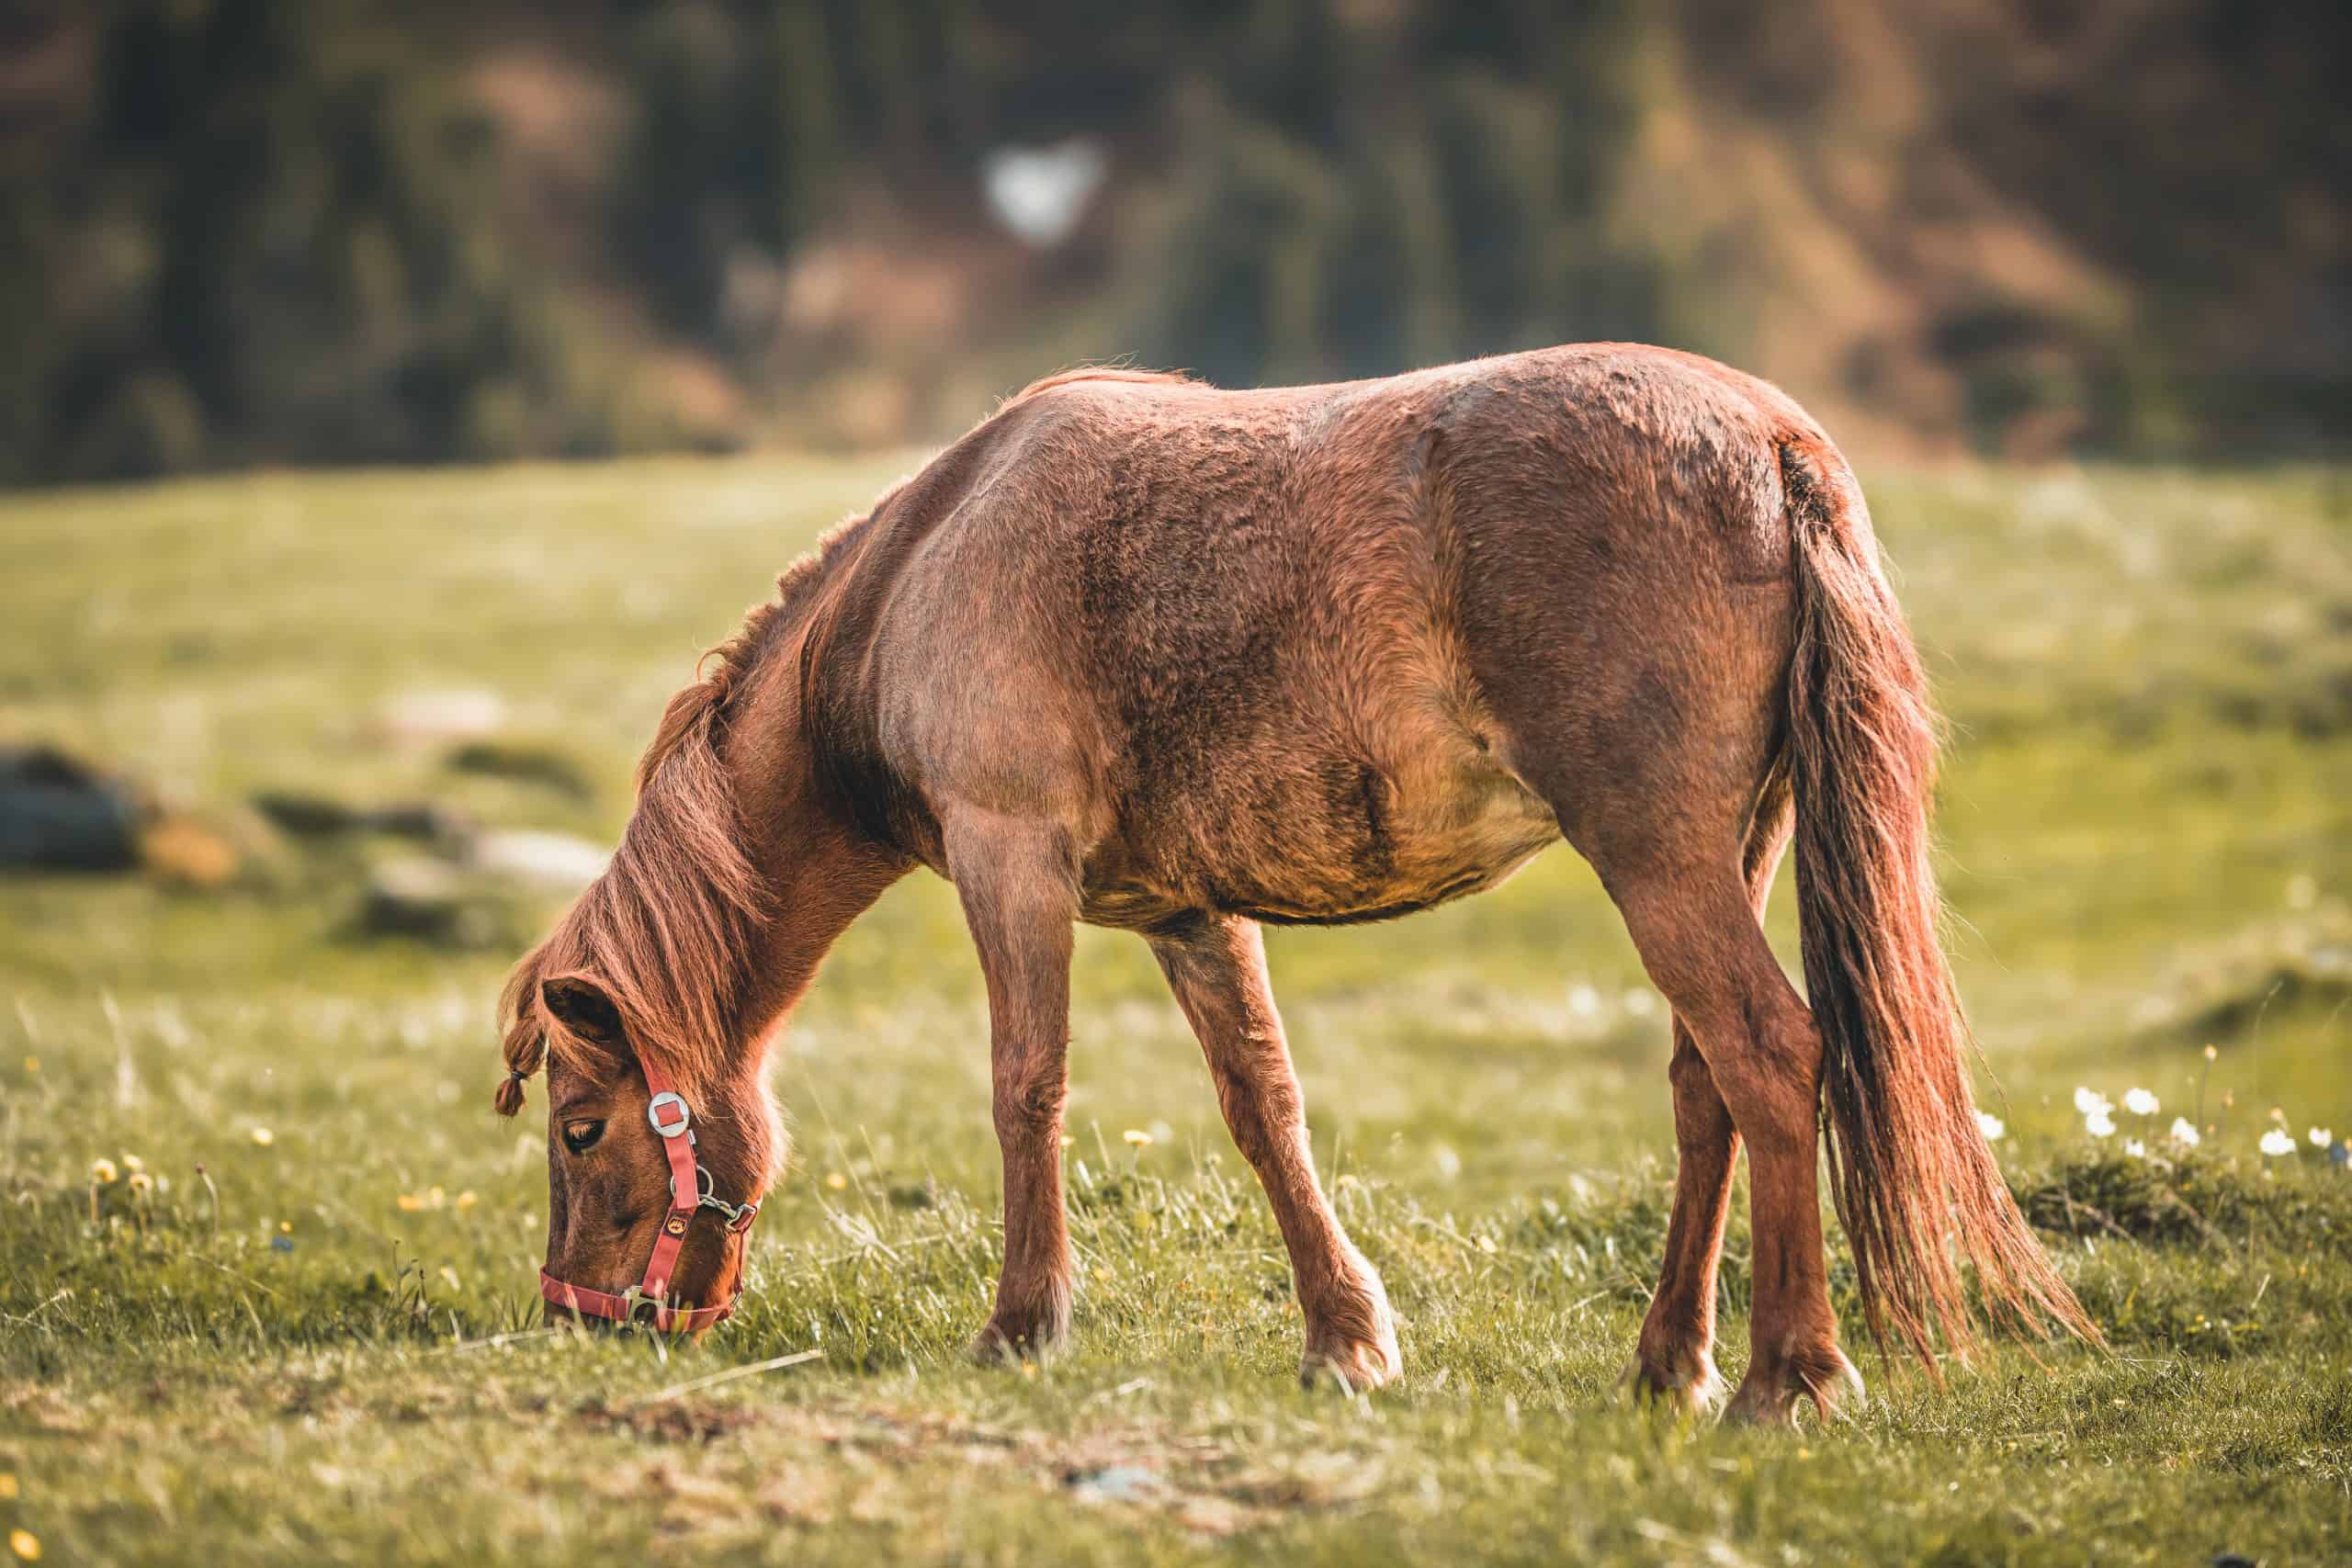 symptoms of ulcers in horses grazing